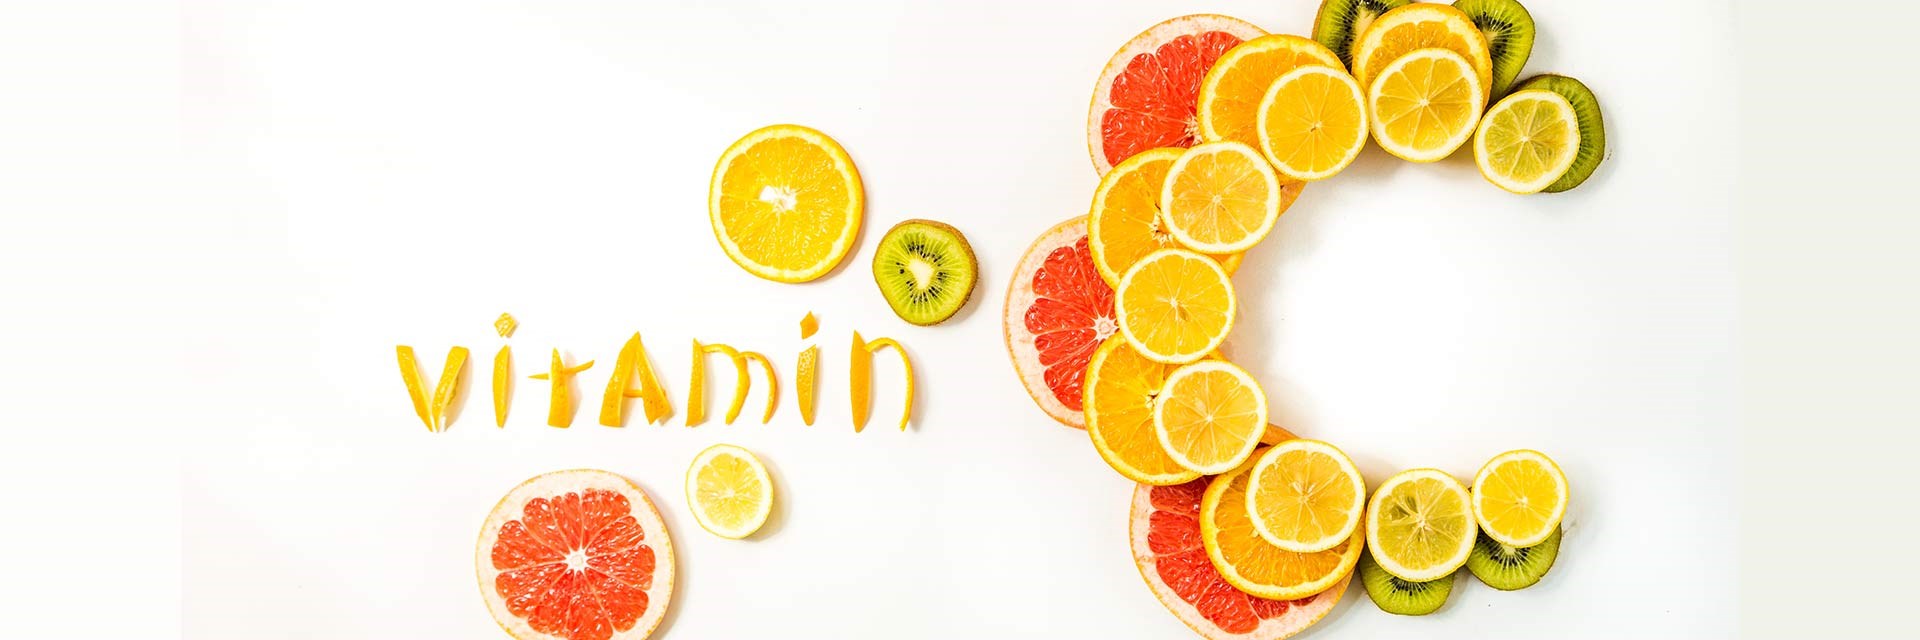 The word 'vitamin c' spelt out in citrus fruits